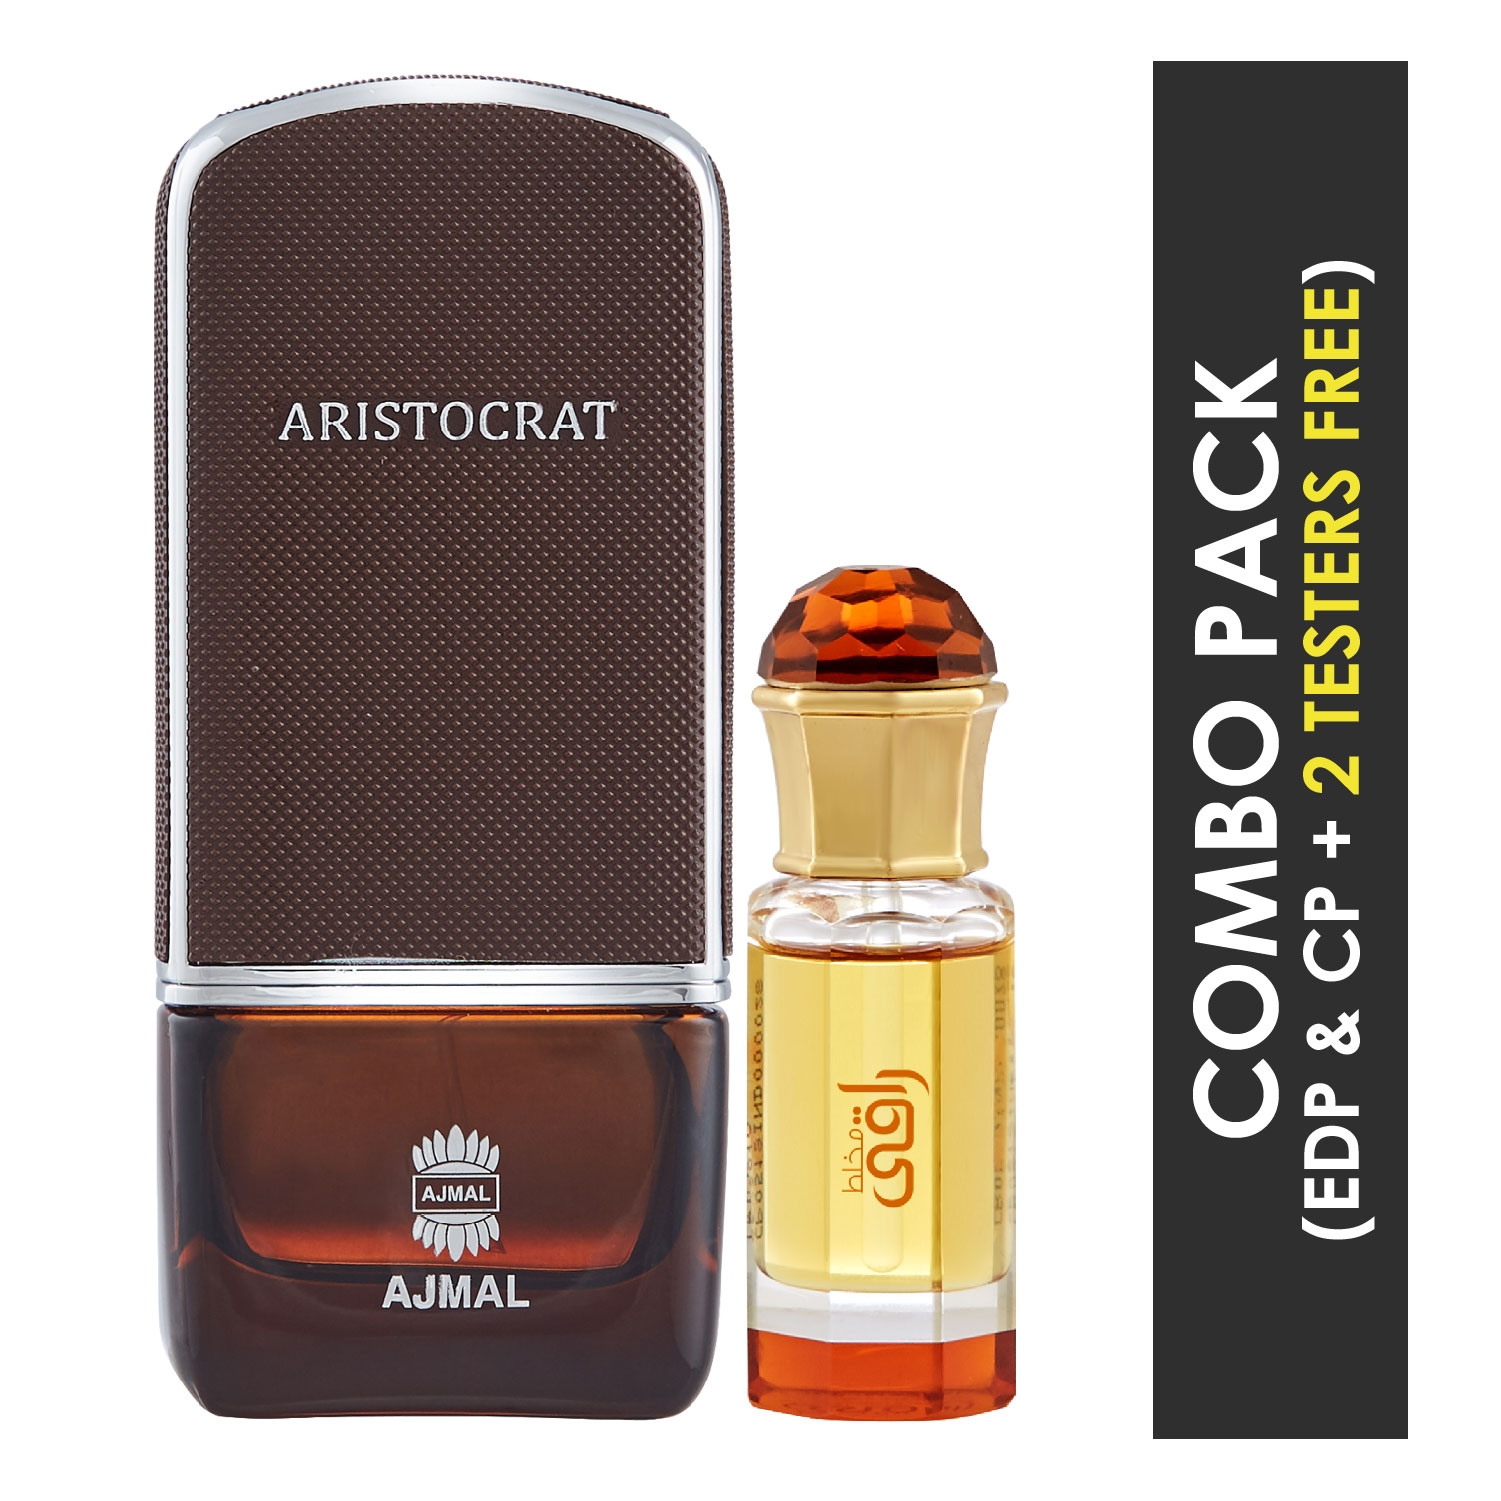 Ajmal | Ajmal Aristocrat EDP Citrus Woody Perfume 75ml for Men and Mukhallat Raaqi Concentrated Perfume Oil Floral Fruity Alcohol-free Attar 10ml for Unisex + 2 Parfum Testers FREE